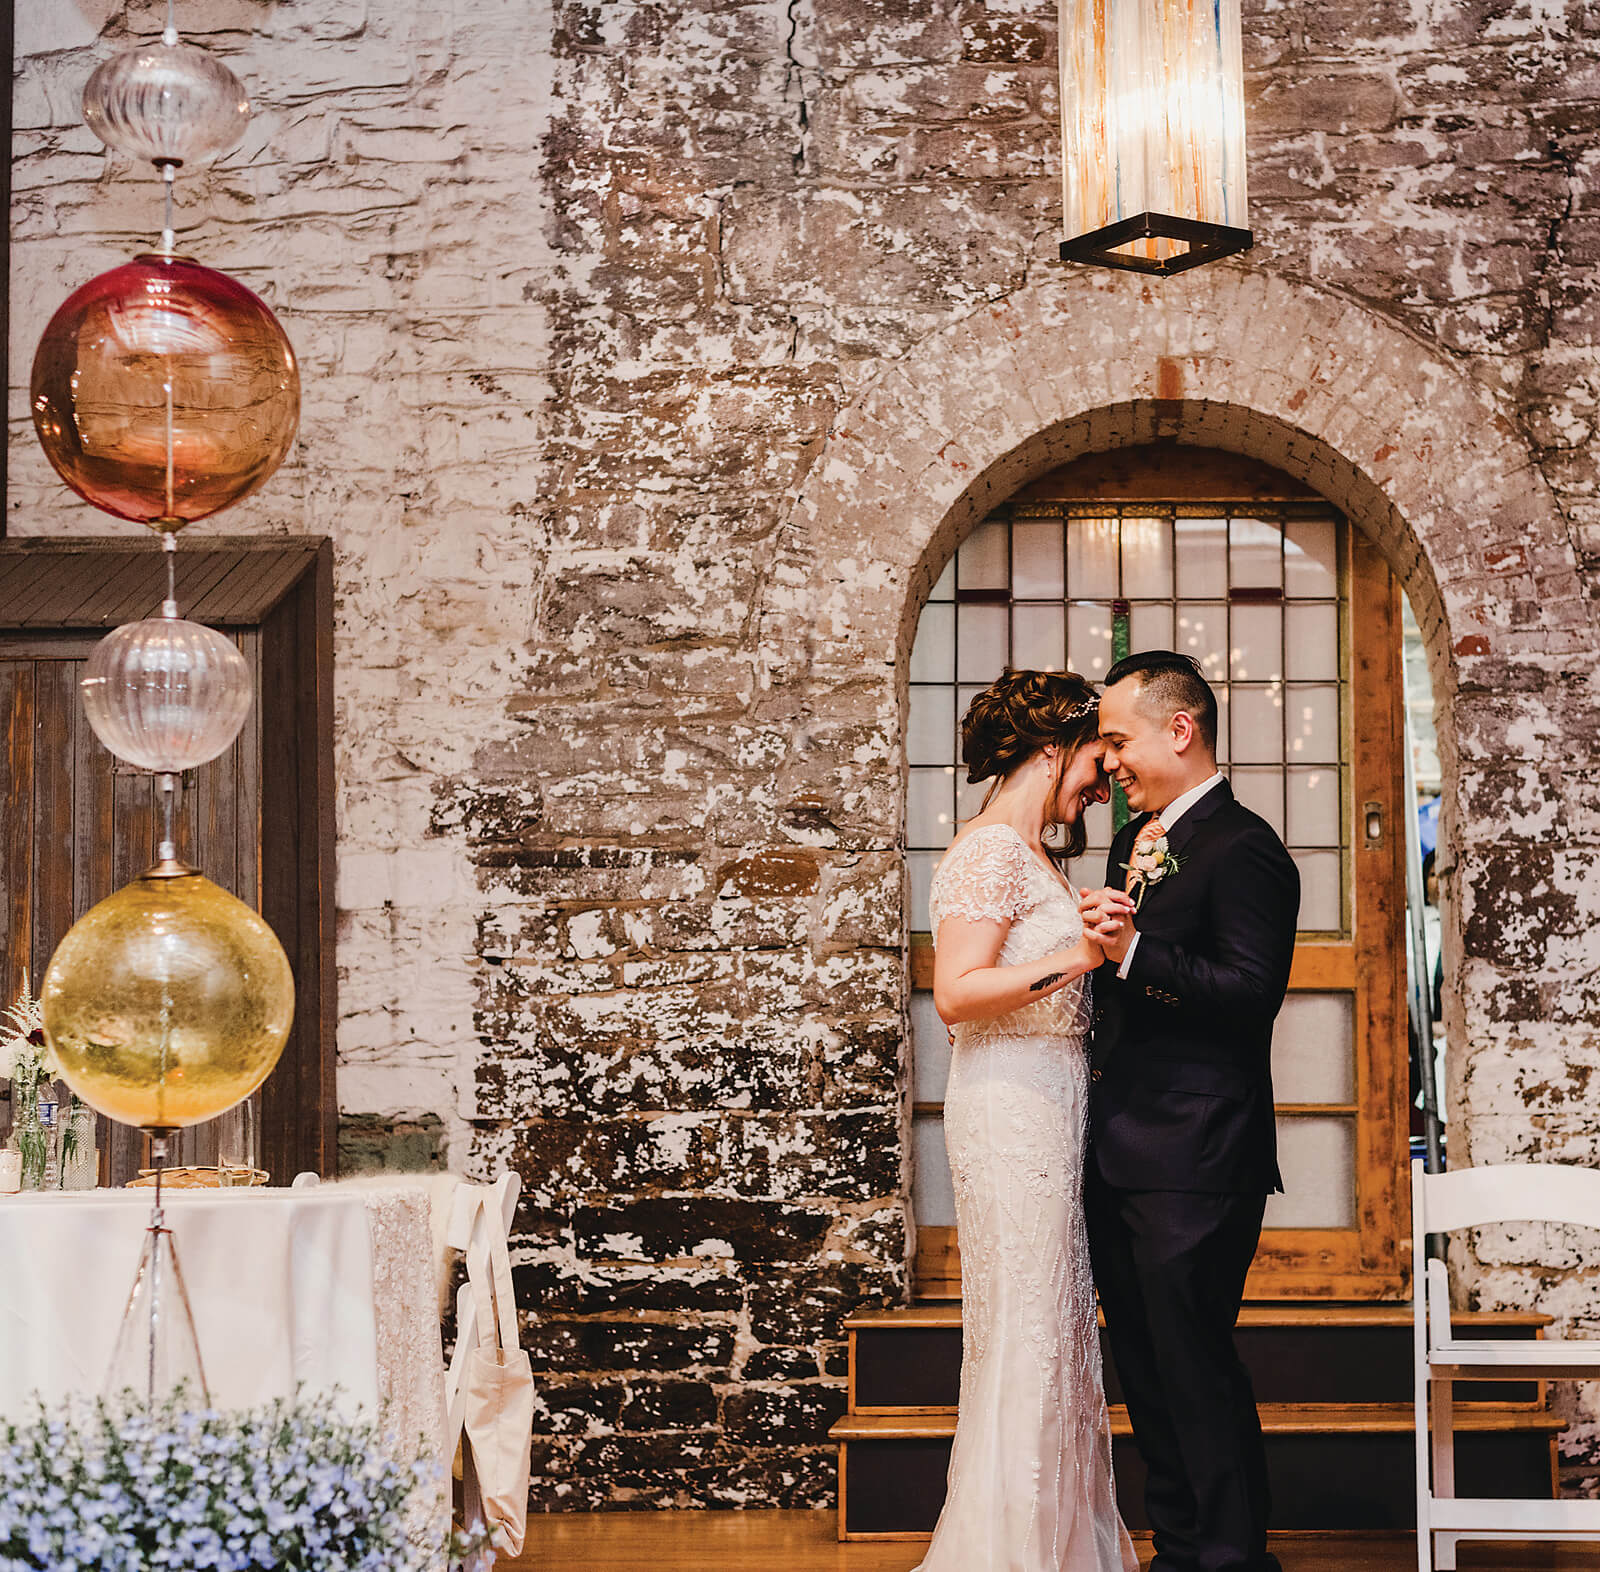 19 Wedding Venues That Are Perfect for a Spring Wedding